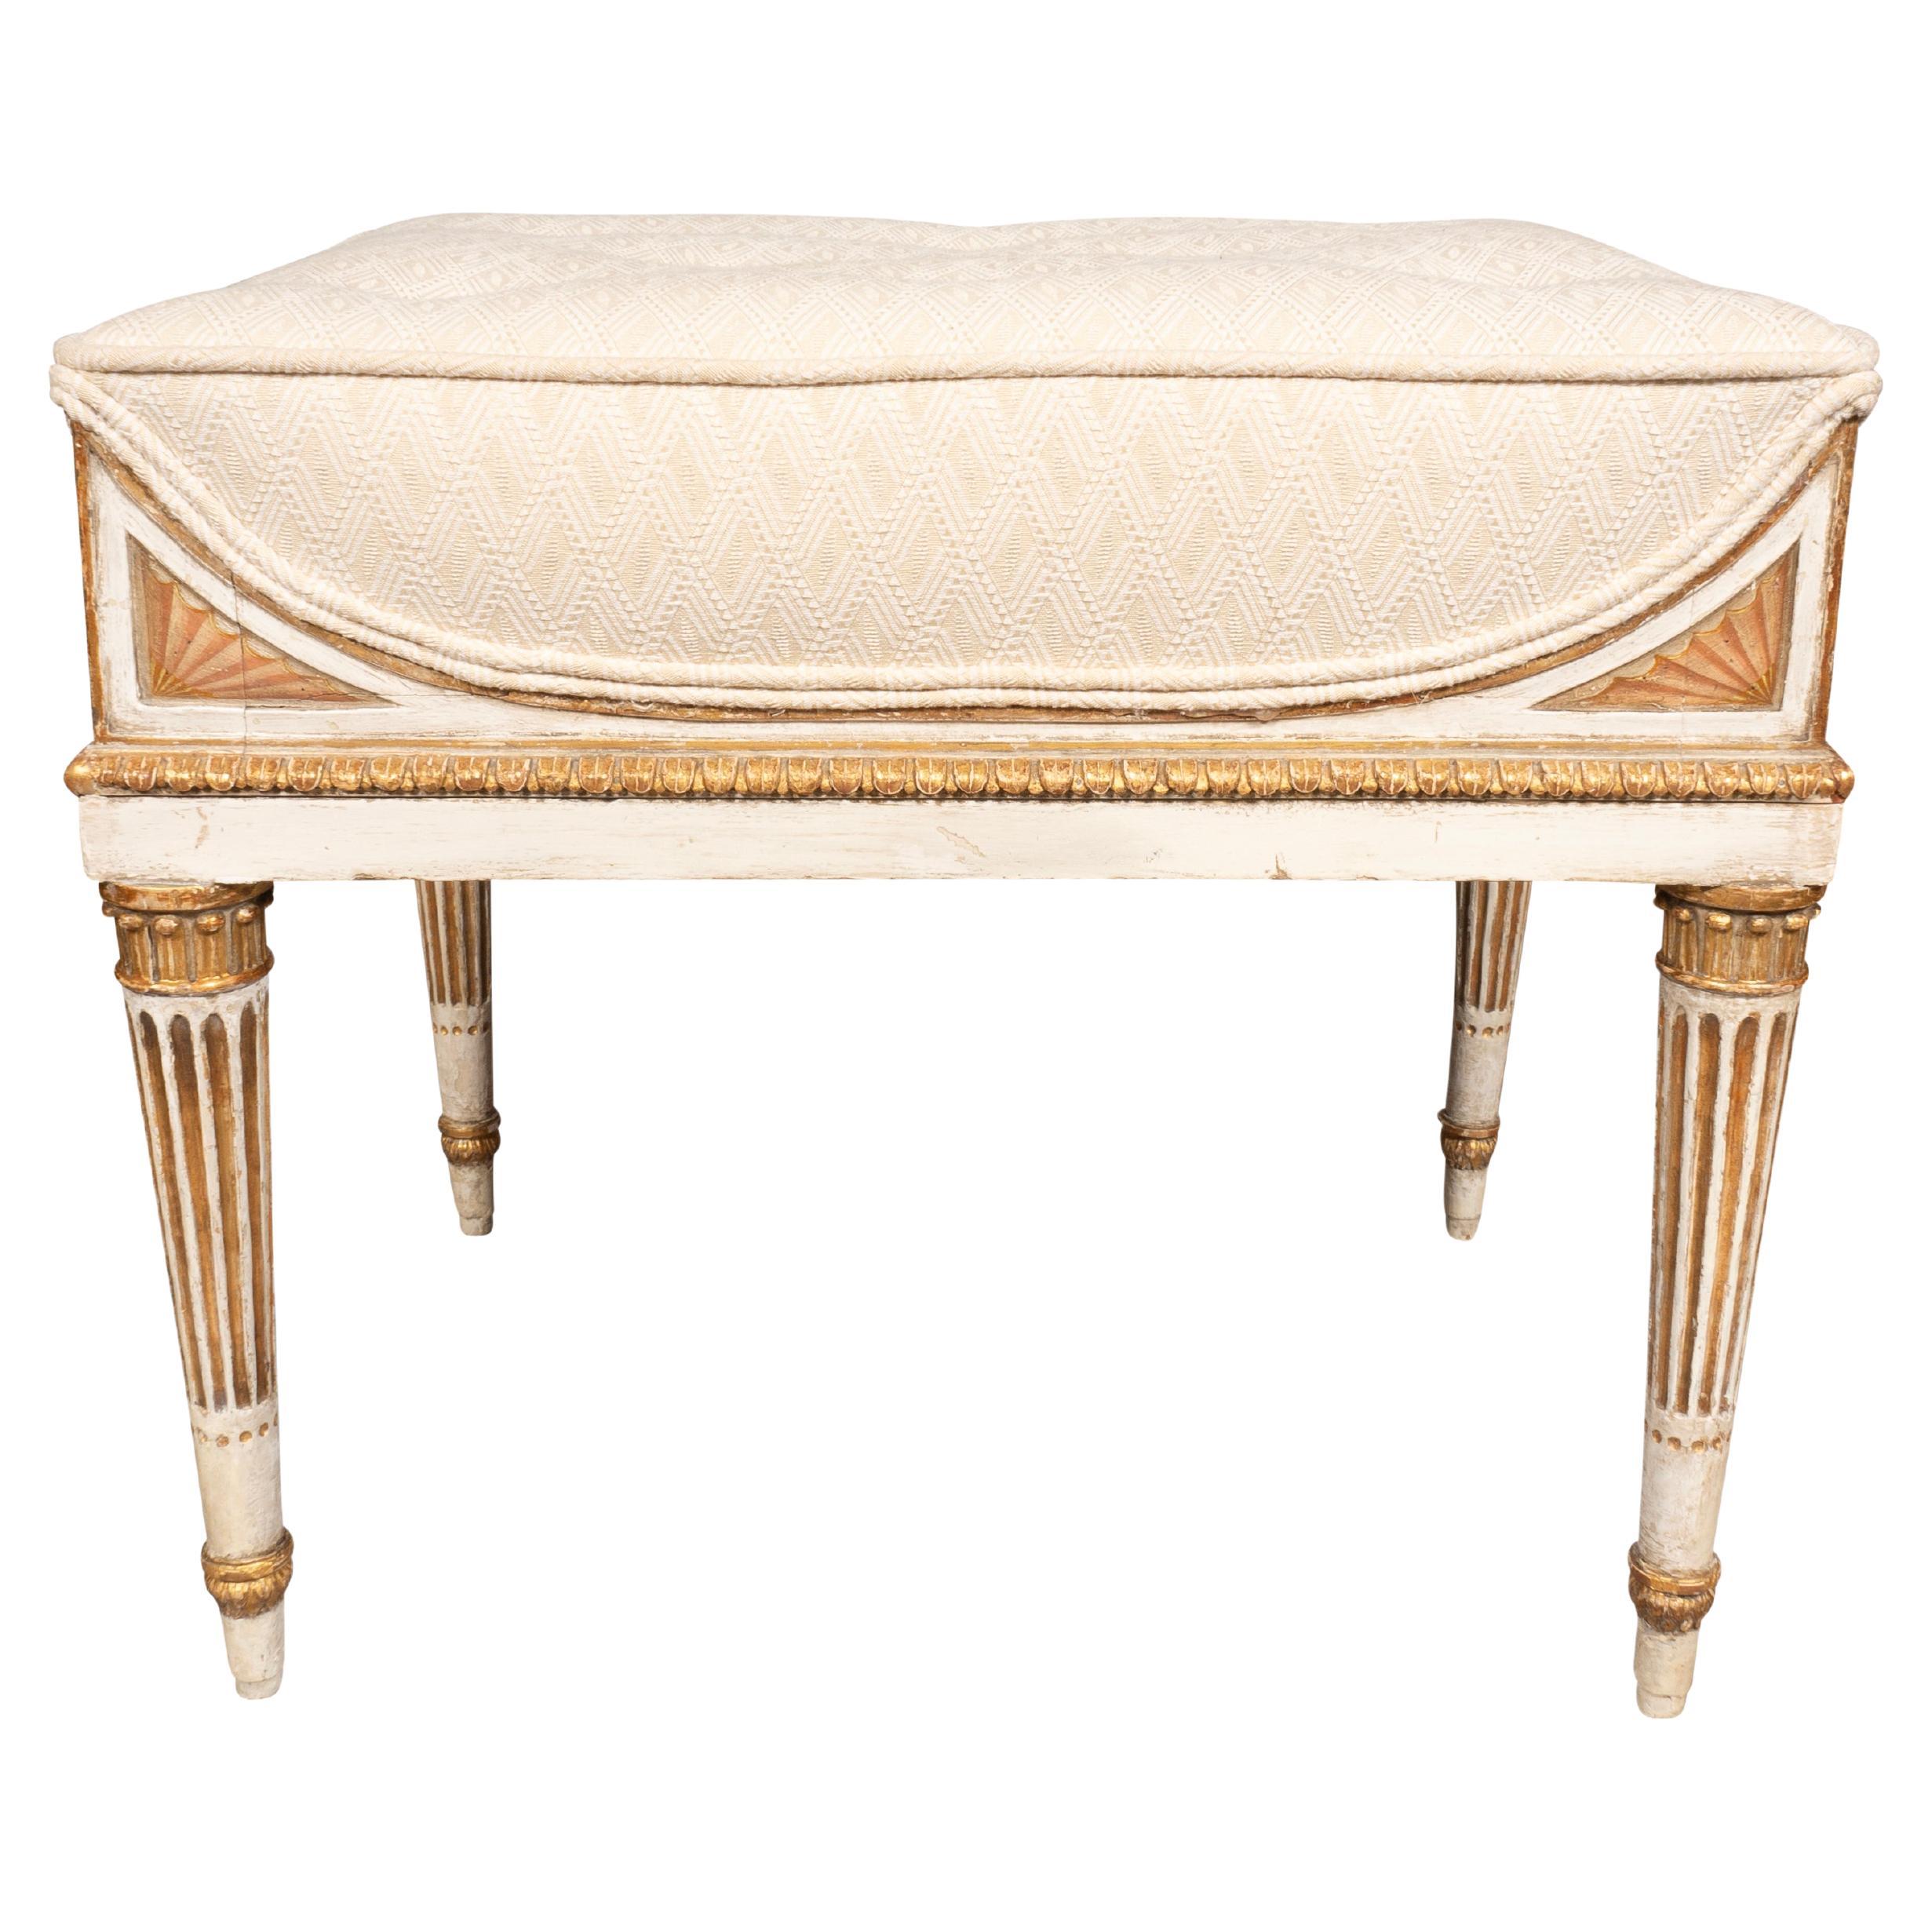  German Neoclassical Creme Painted And Giltwood Bench From Schloss Seelowitz